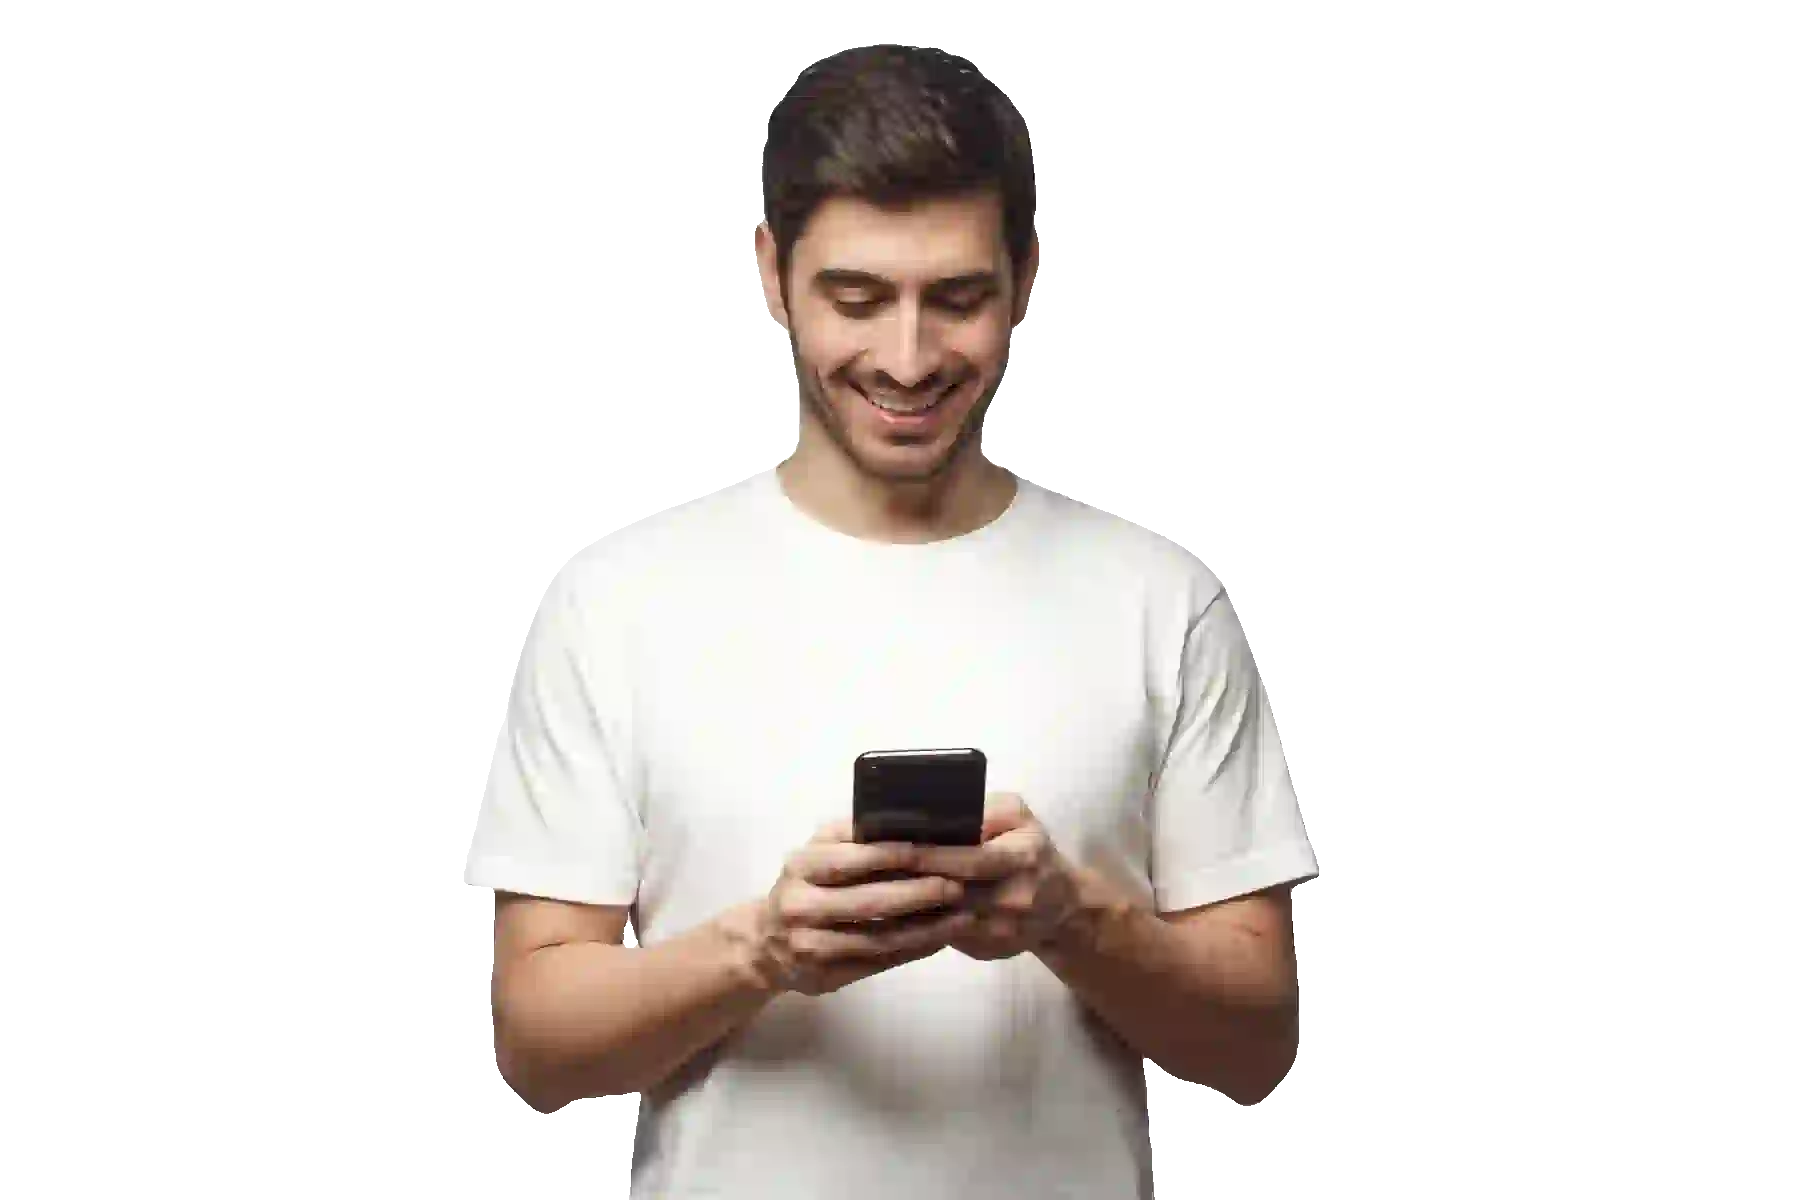 man holding a mobile phone